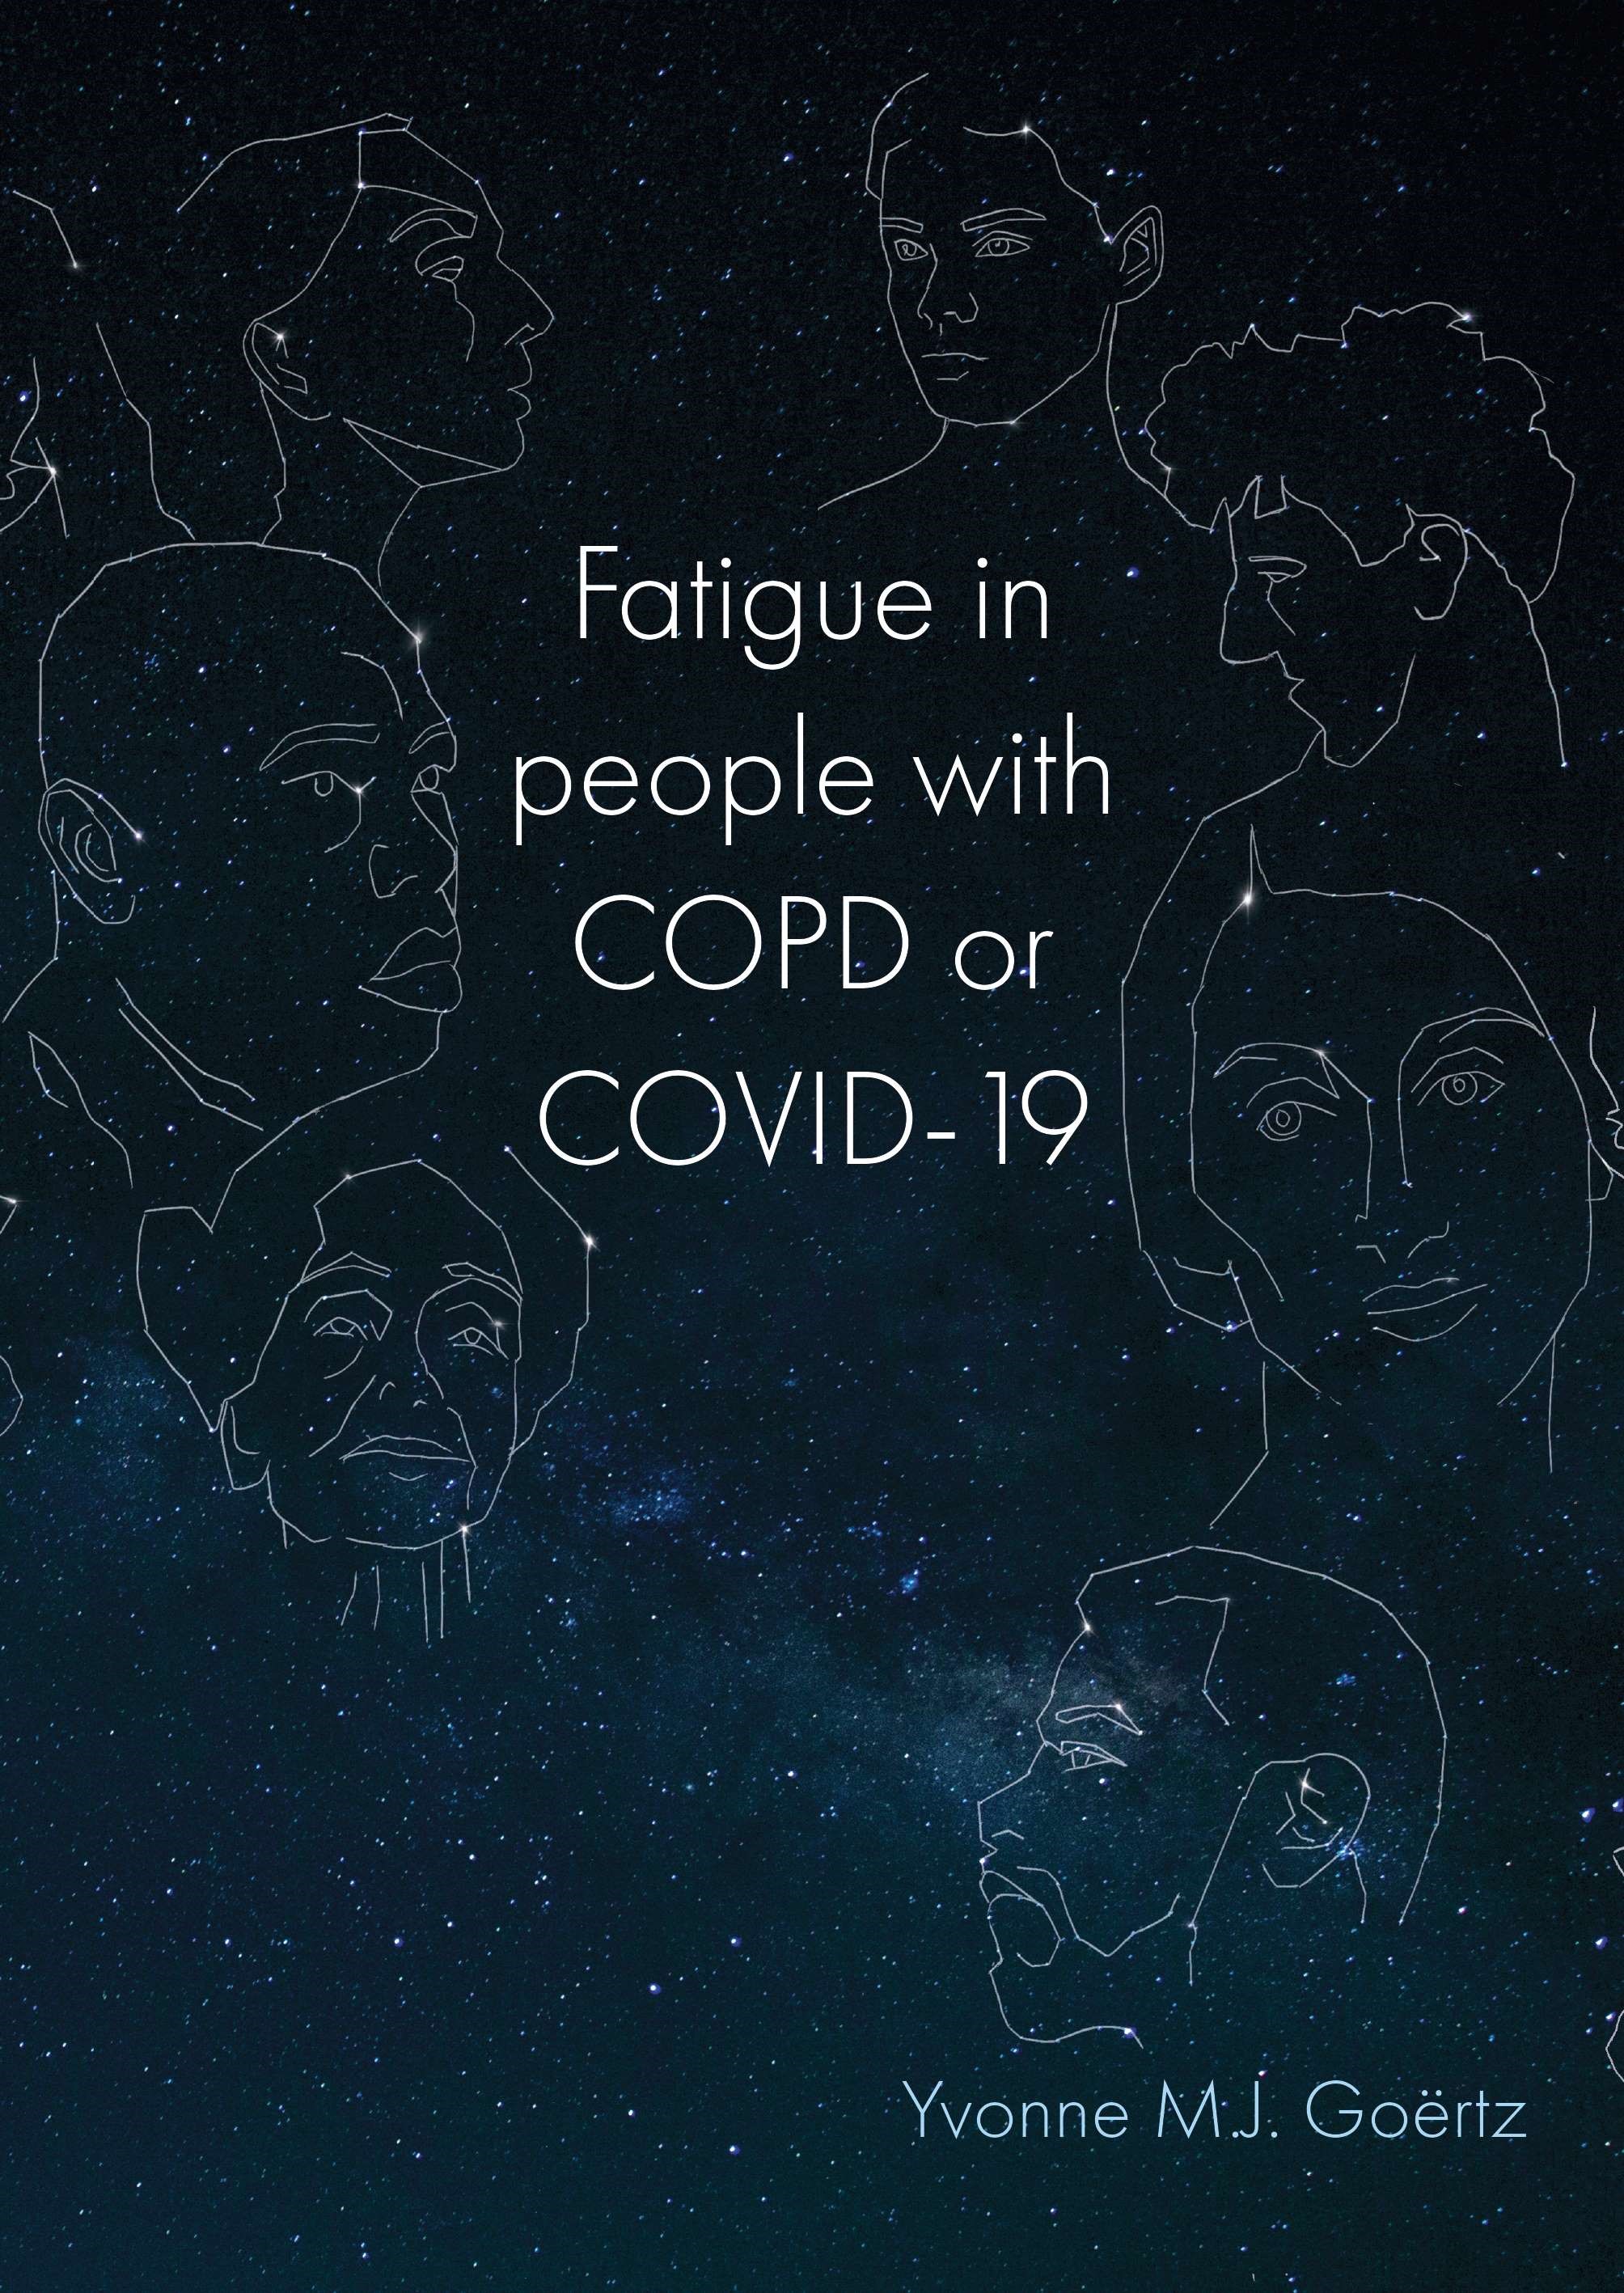 Goertz - Fatigue in people with COPD or COVID-19